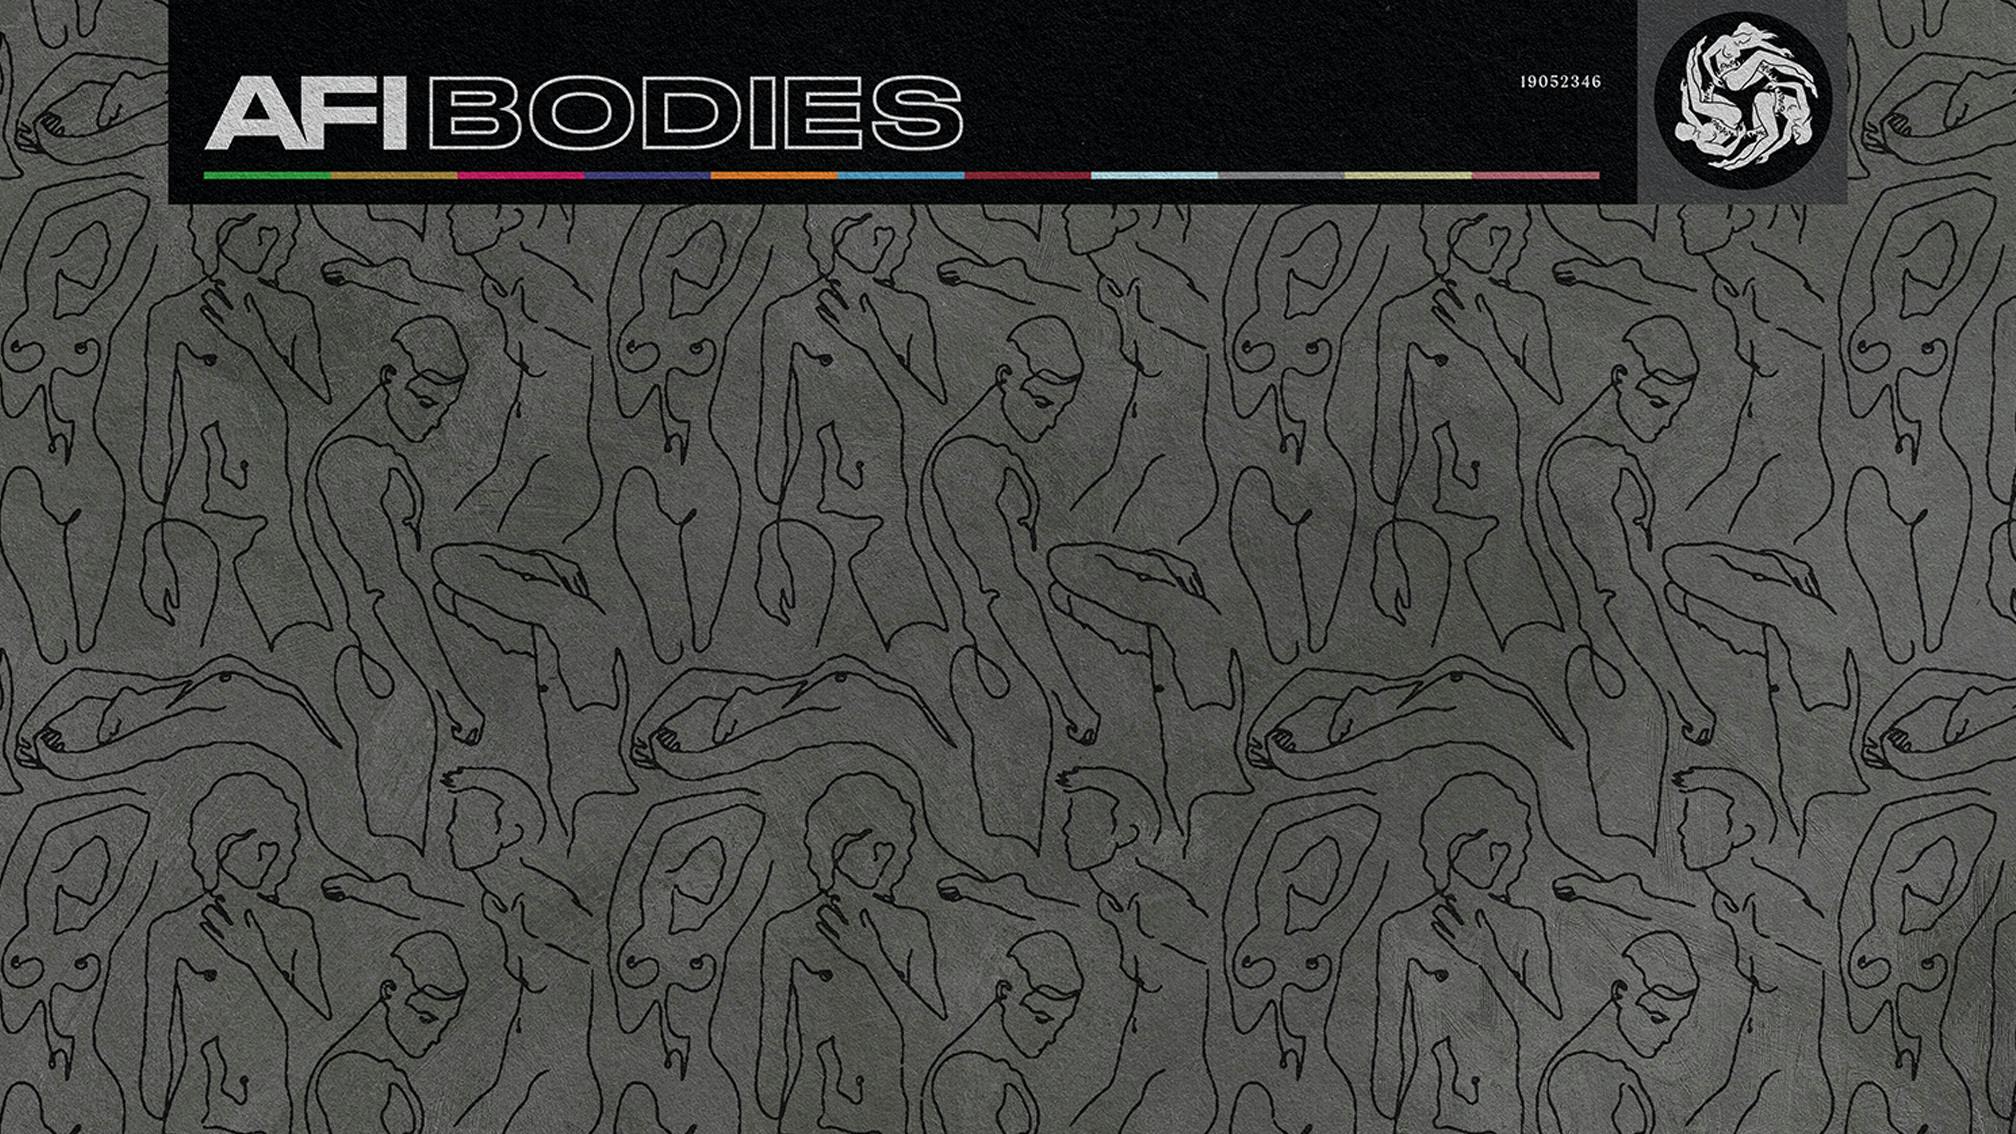 AFI announce upcoming album Bodies, release two new songs